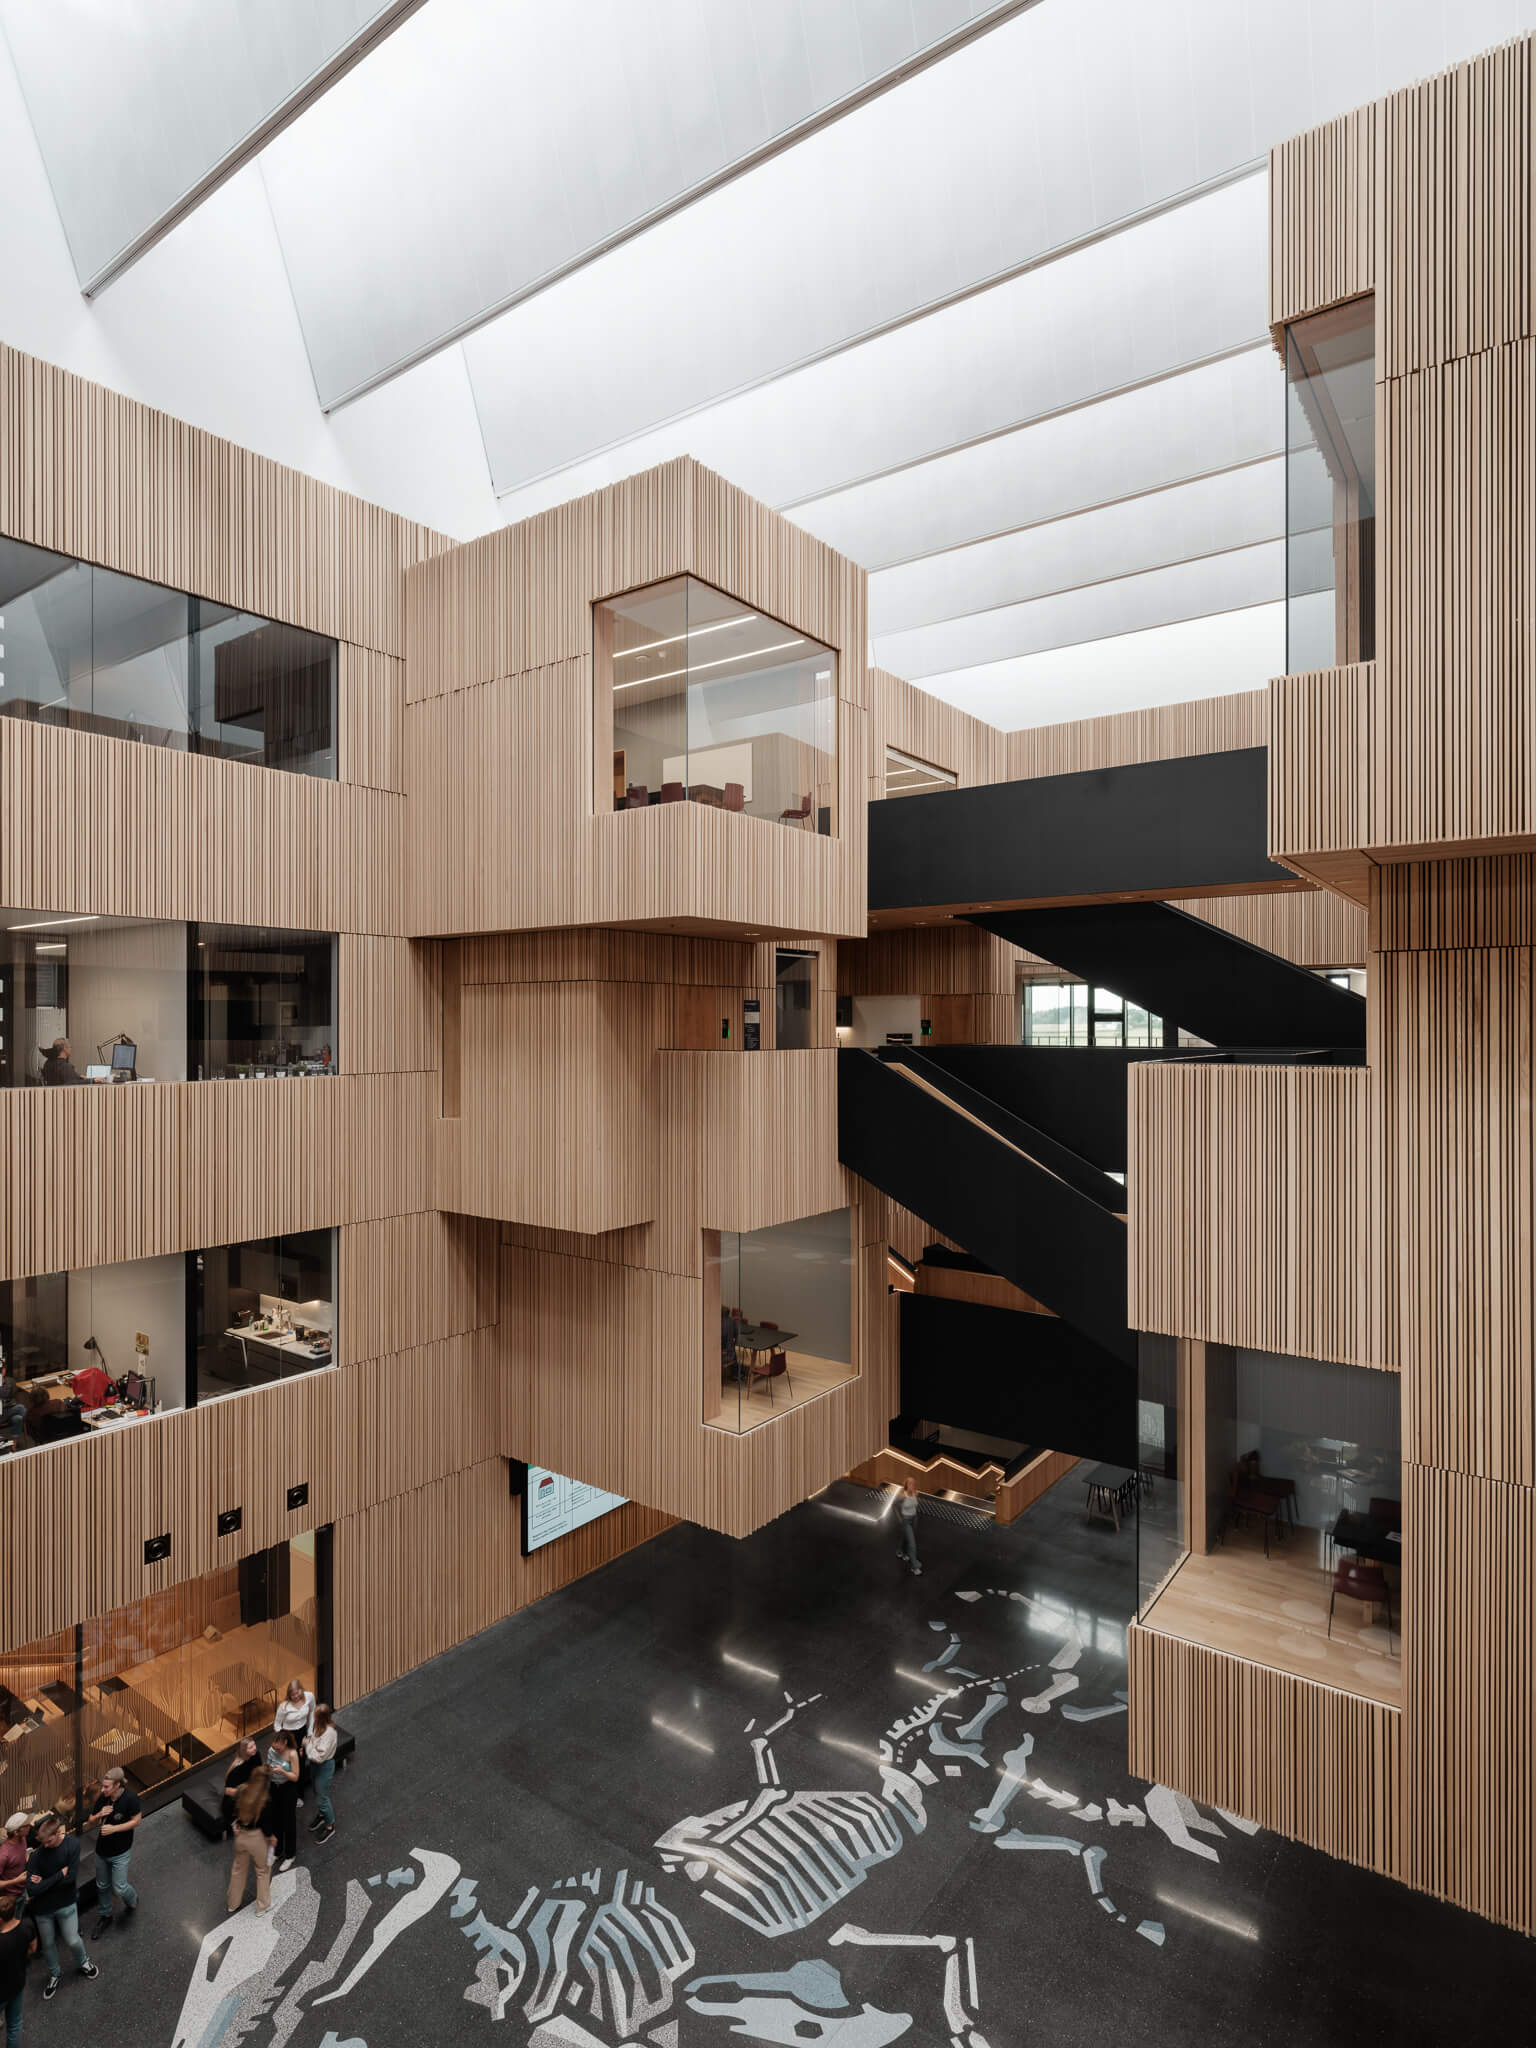 an open atrium with boxy office and classroom space